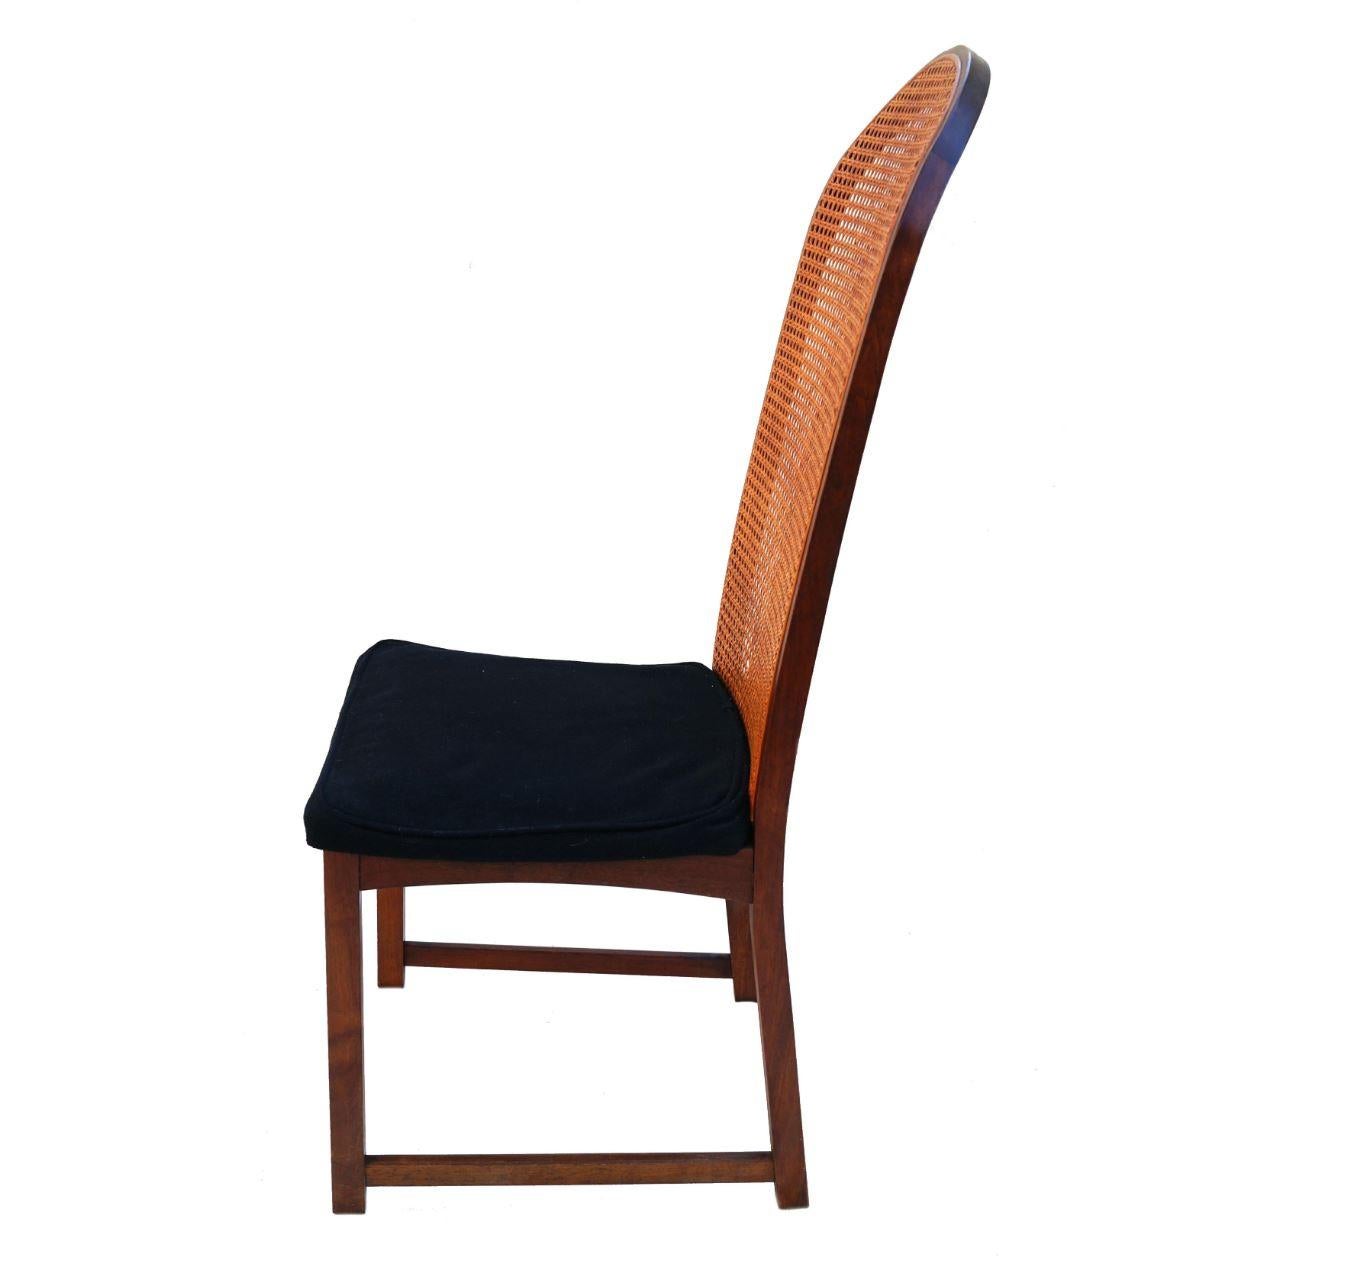 Milo Baughman curved cane back dining or side chair.
If you are in the New Jersey, New York City Metro Area, please contact us with your delivery zipcode, as we may be able to deliver curbside for less than the calculated White Glove rates shown.